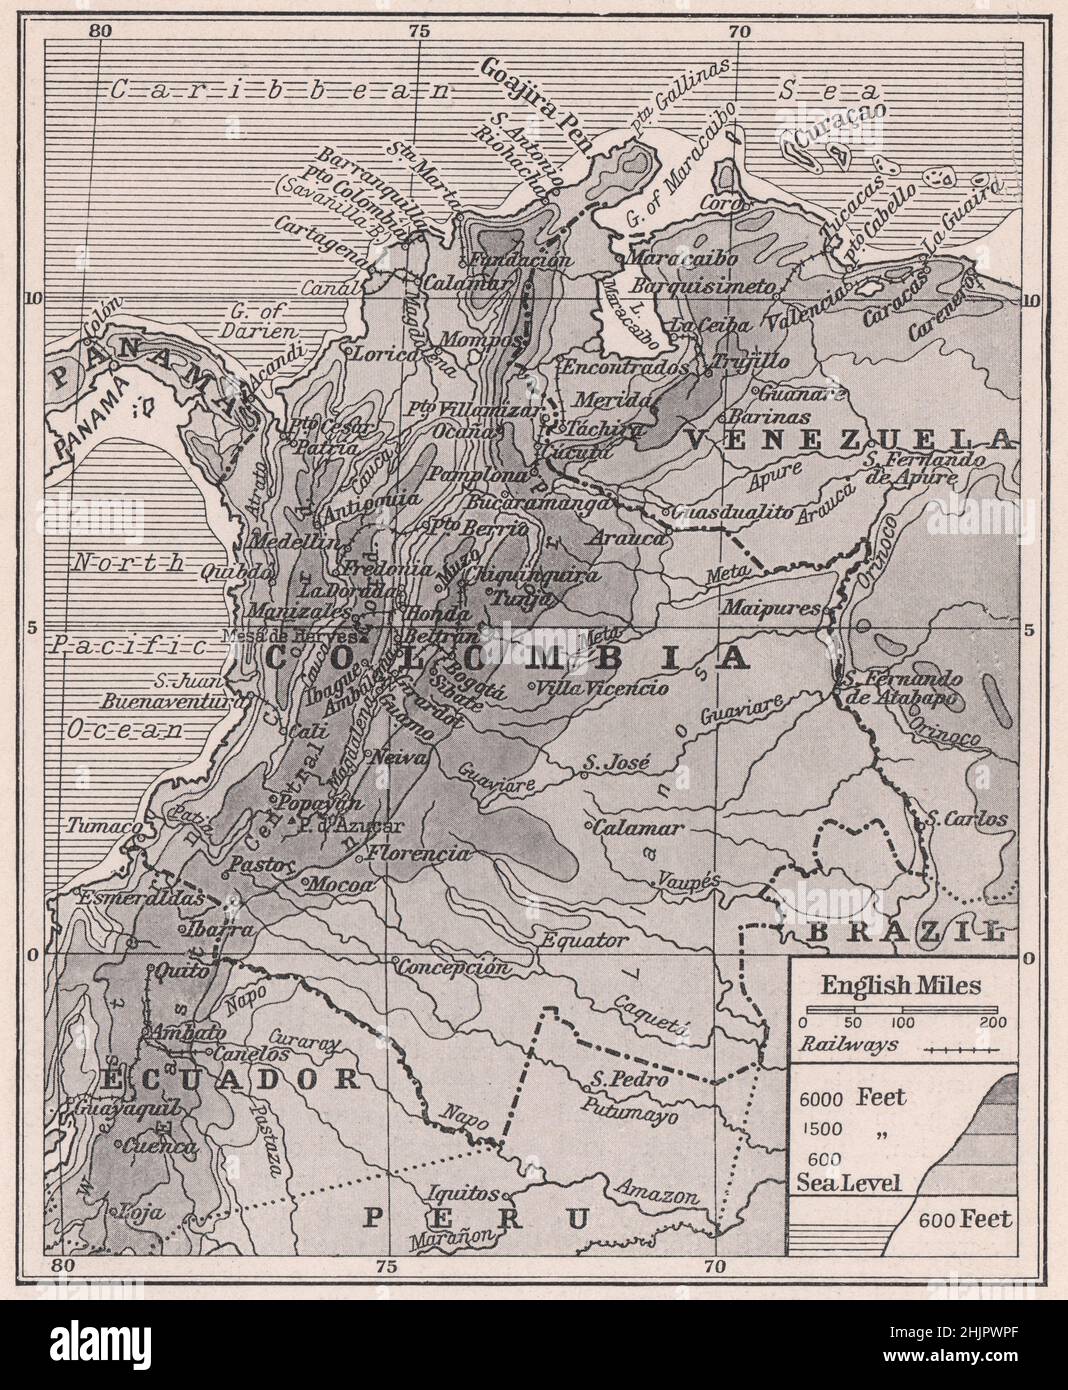 Colombia, its Great waterways and its border states (1923 map) Stock Photo